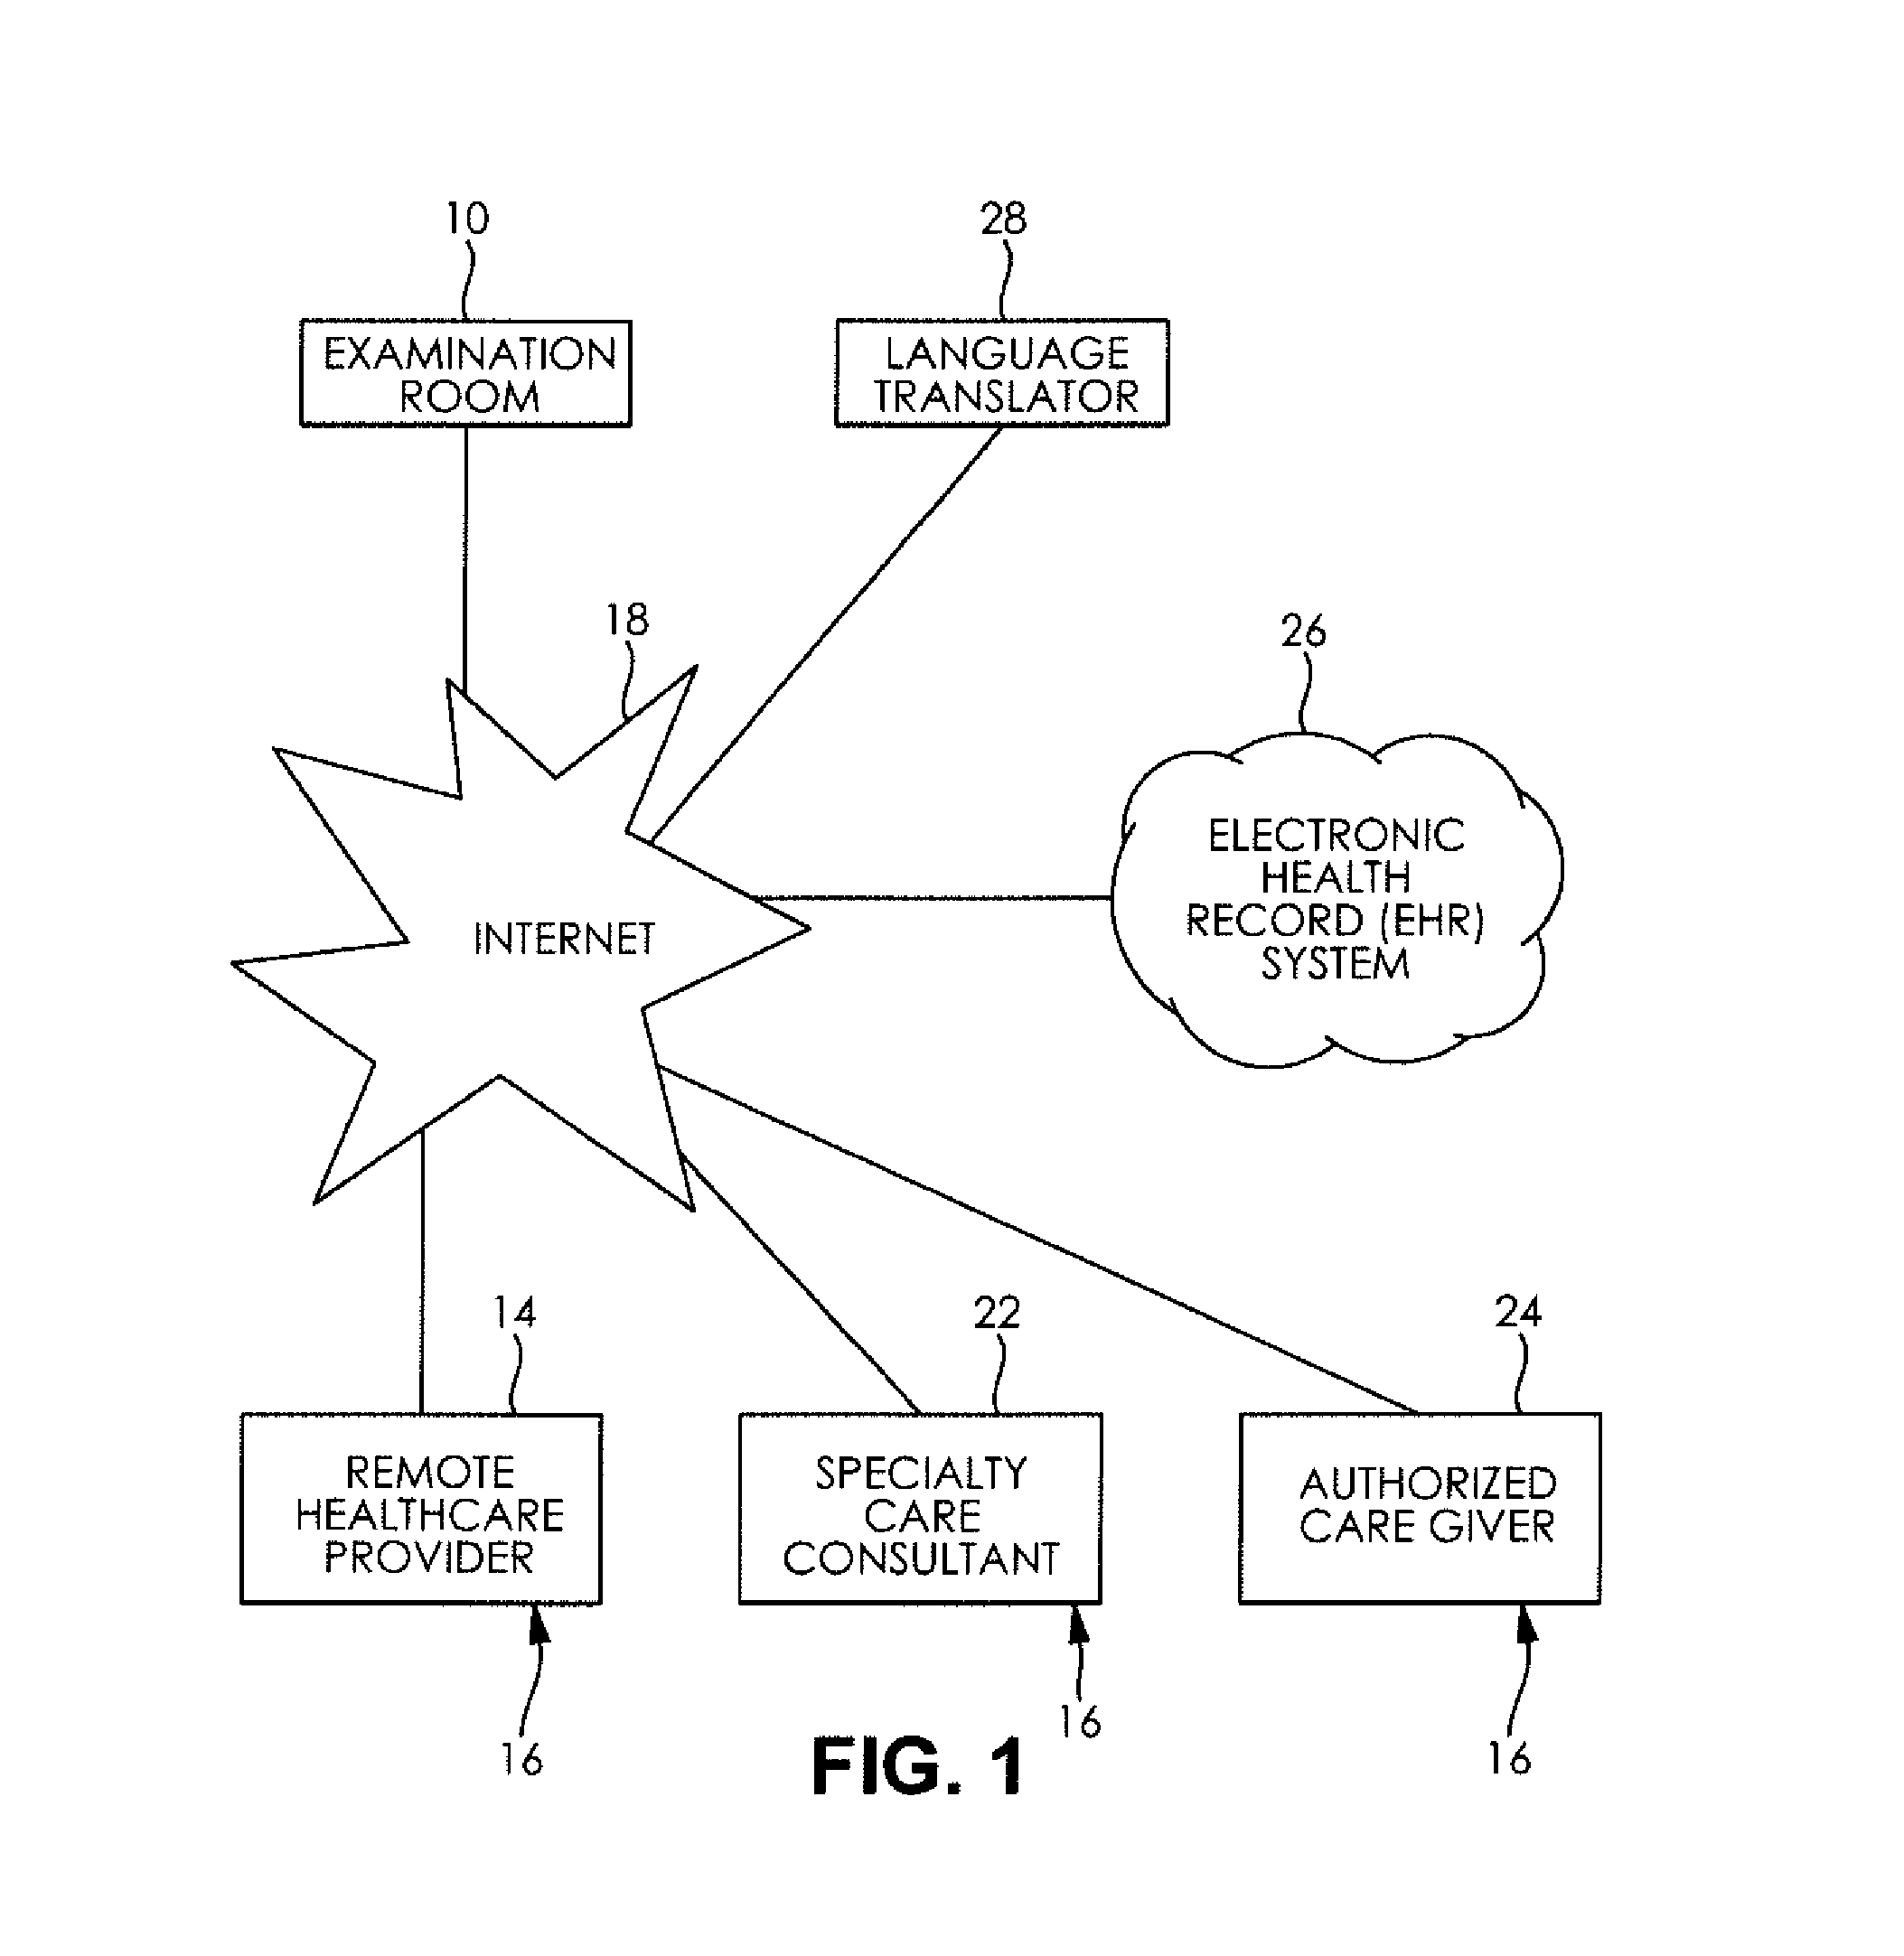 System and Method for Providing Healthcare Services via Telecommunication Networks with Enhanced Interaction between Healthcare Providers and Patients